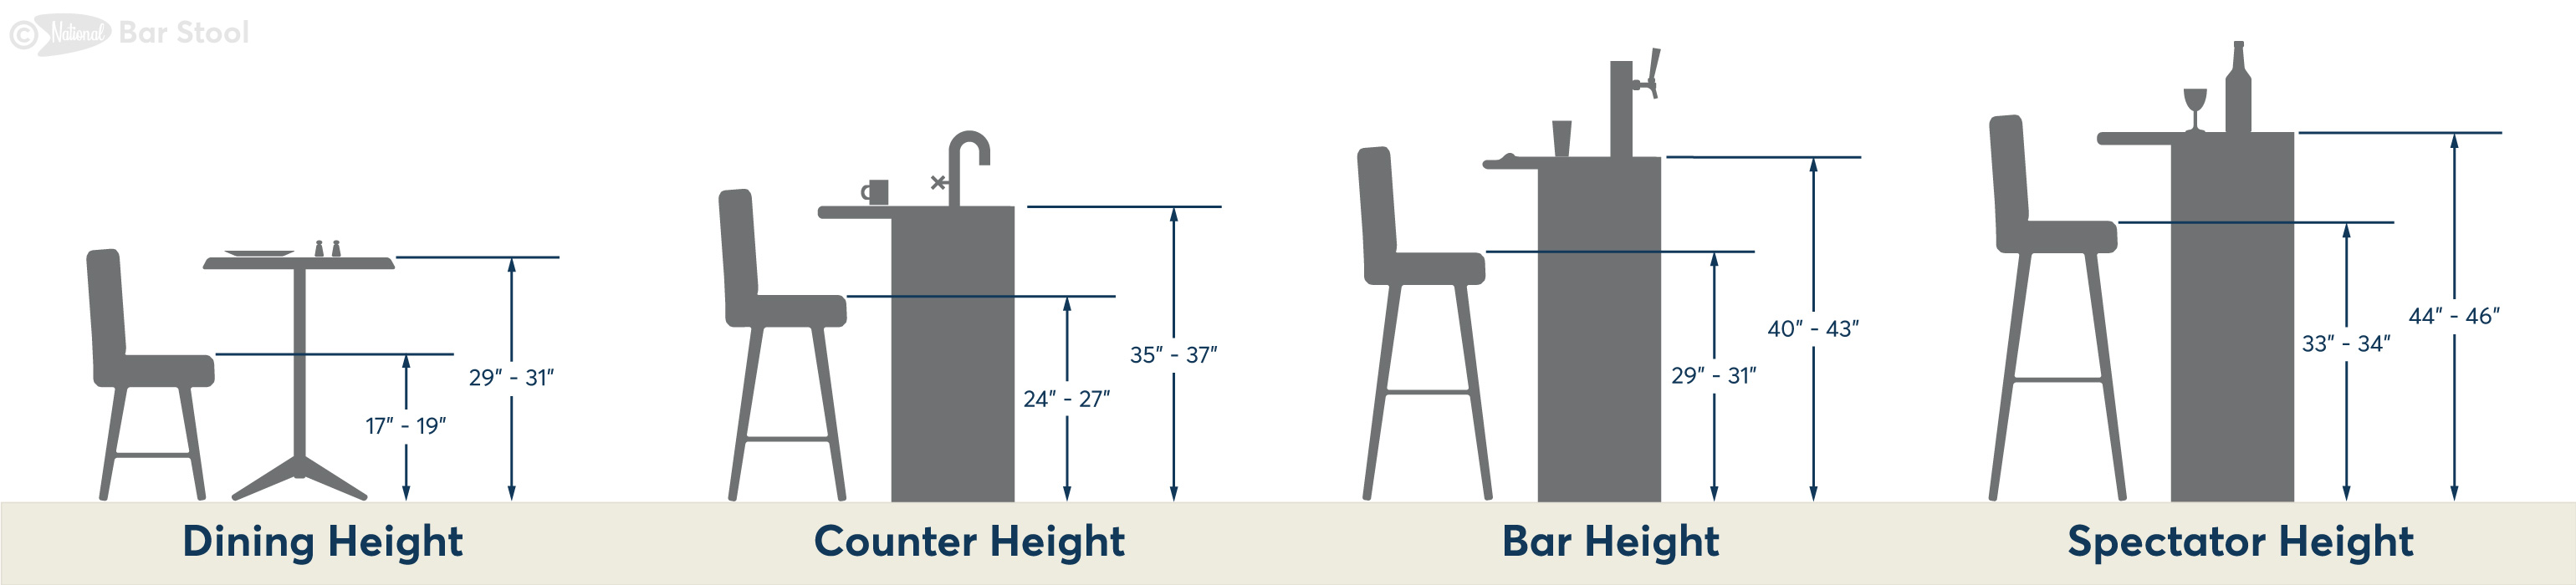 Bar Stool Ing Guide National, What Should Bar Stool Height Be